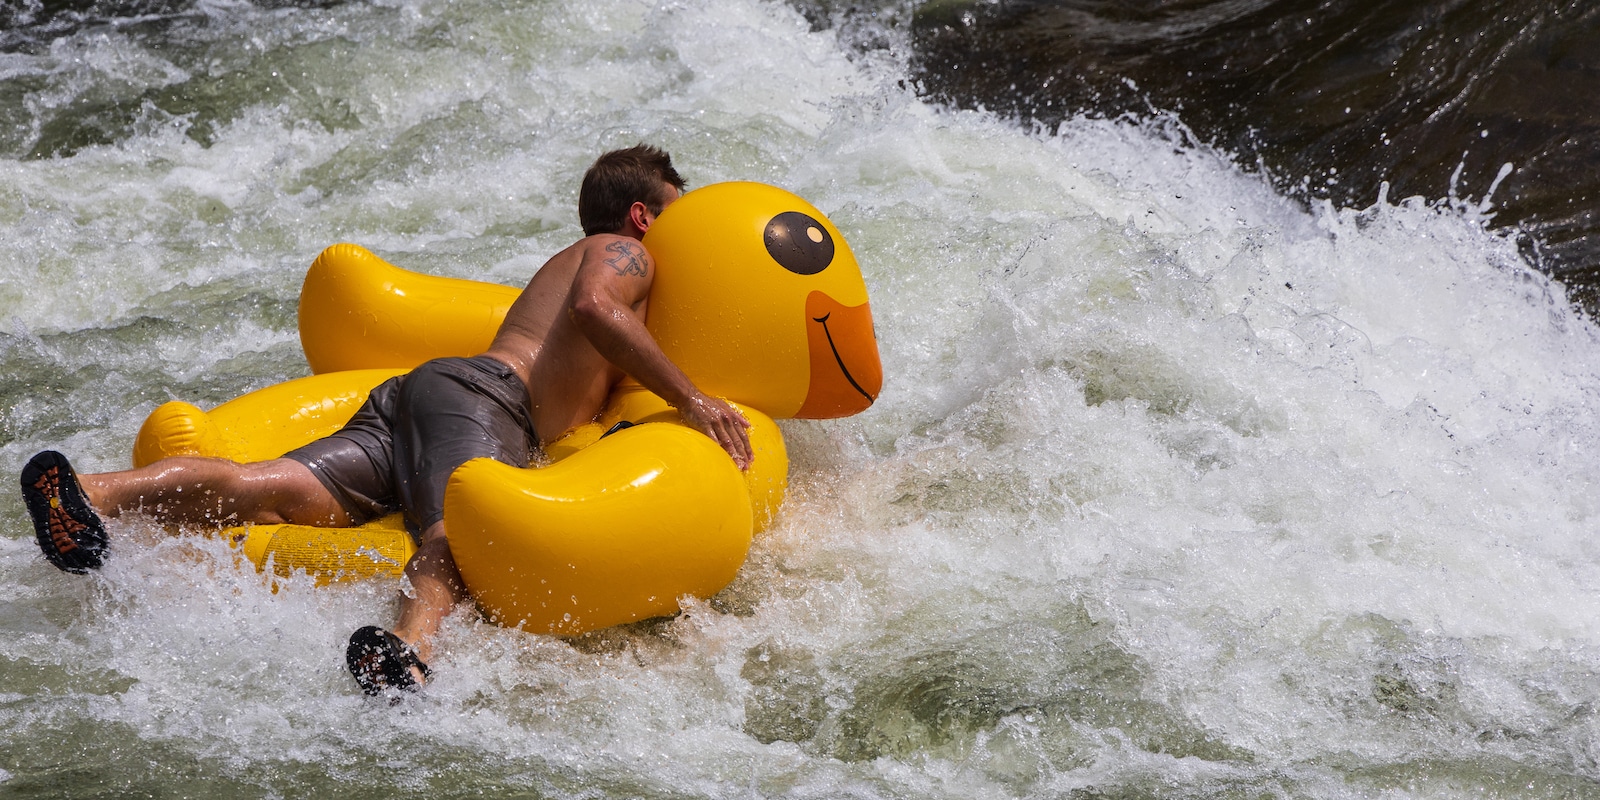 Clear Creek Whitewater Park Rubber Ducky Tuber